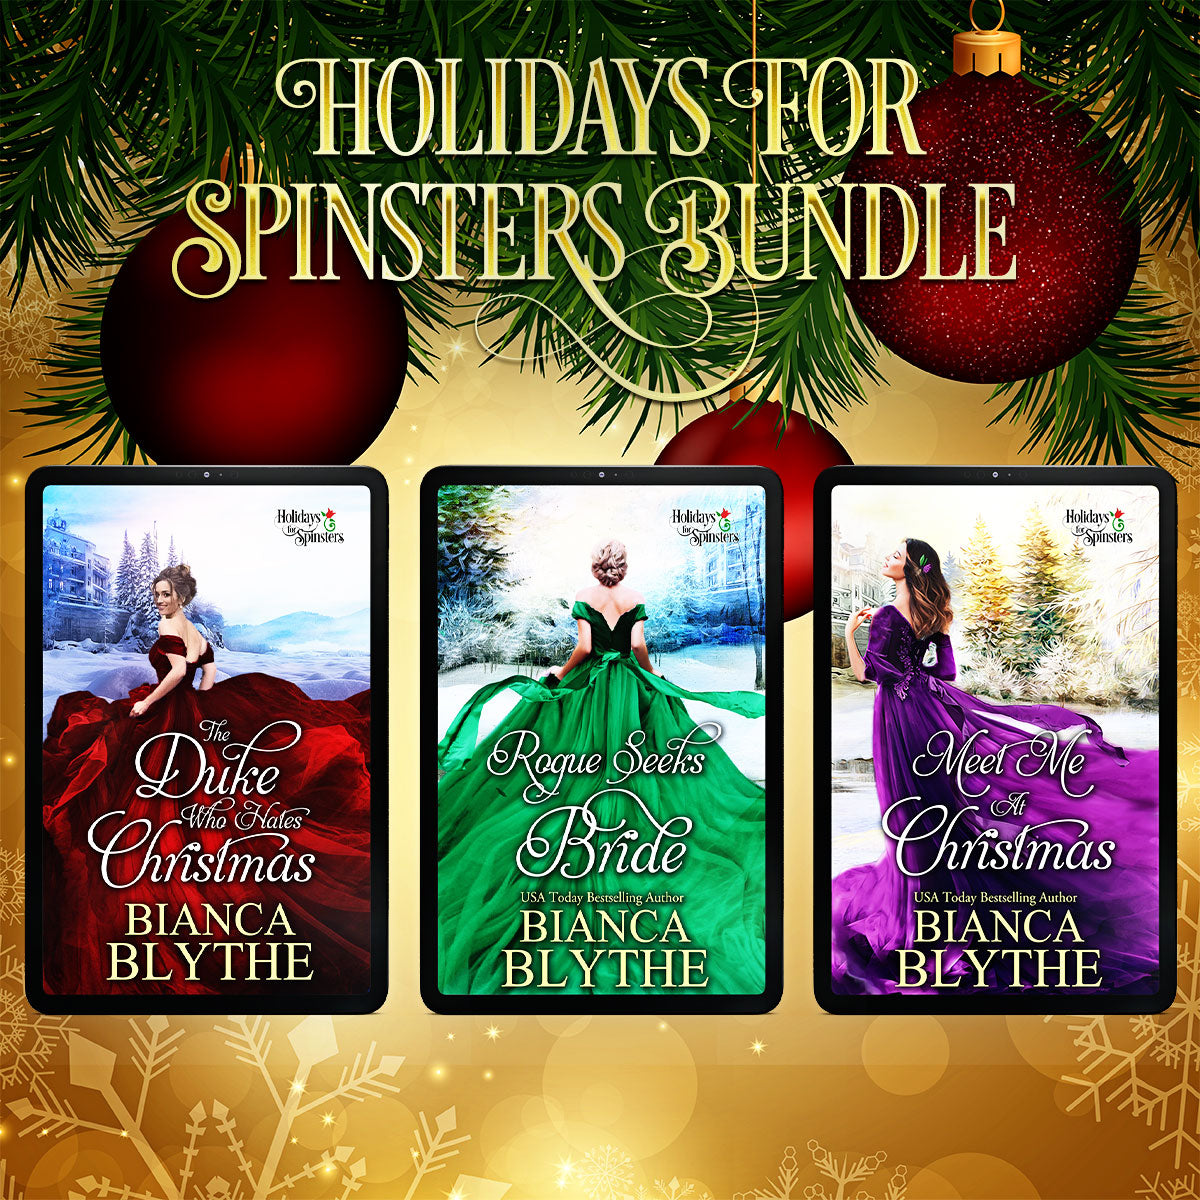 The Holidays for Spinsters Bundle